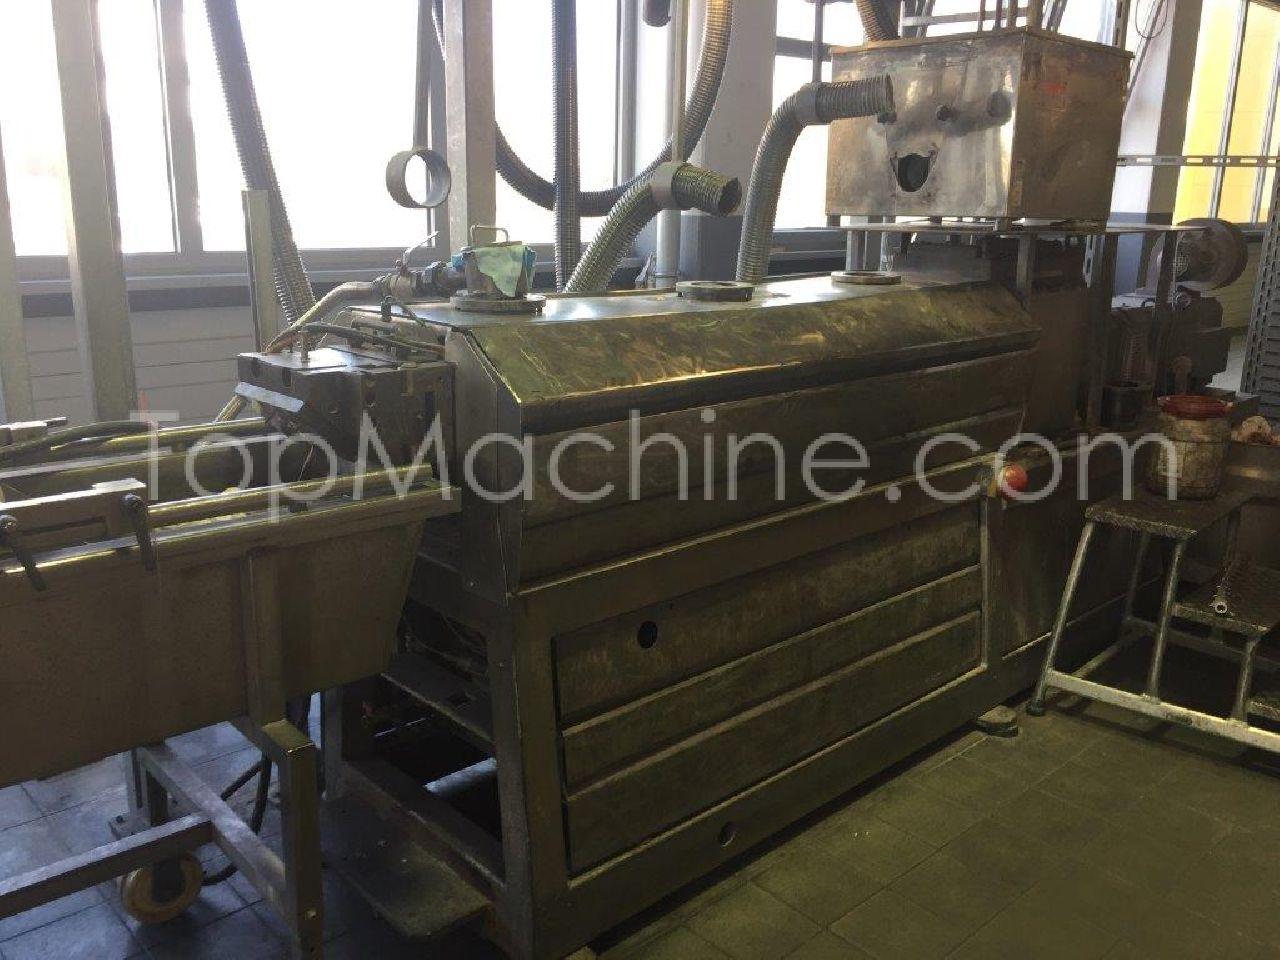 Used Rockstedt 35 Compoundiermaschinen Compounding-Anlage